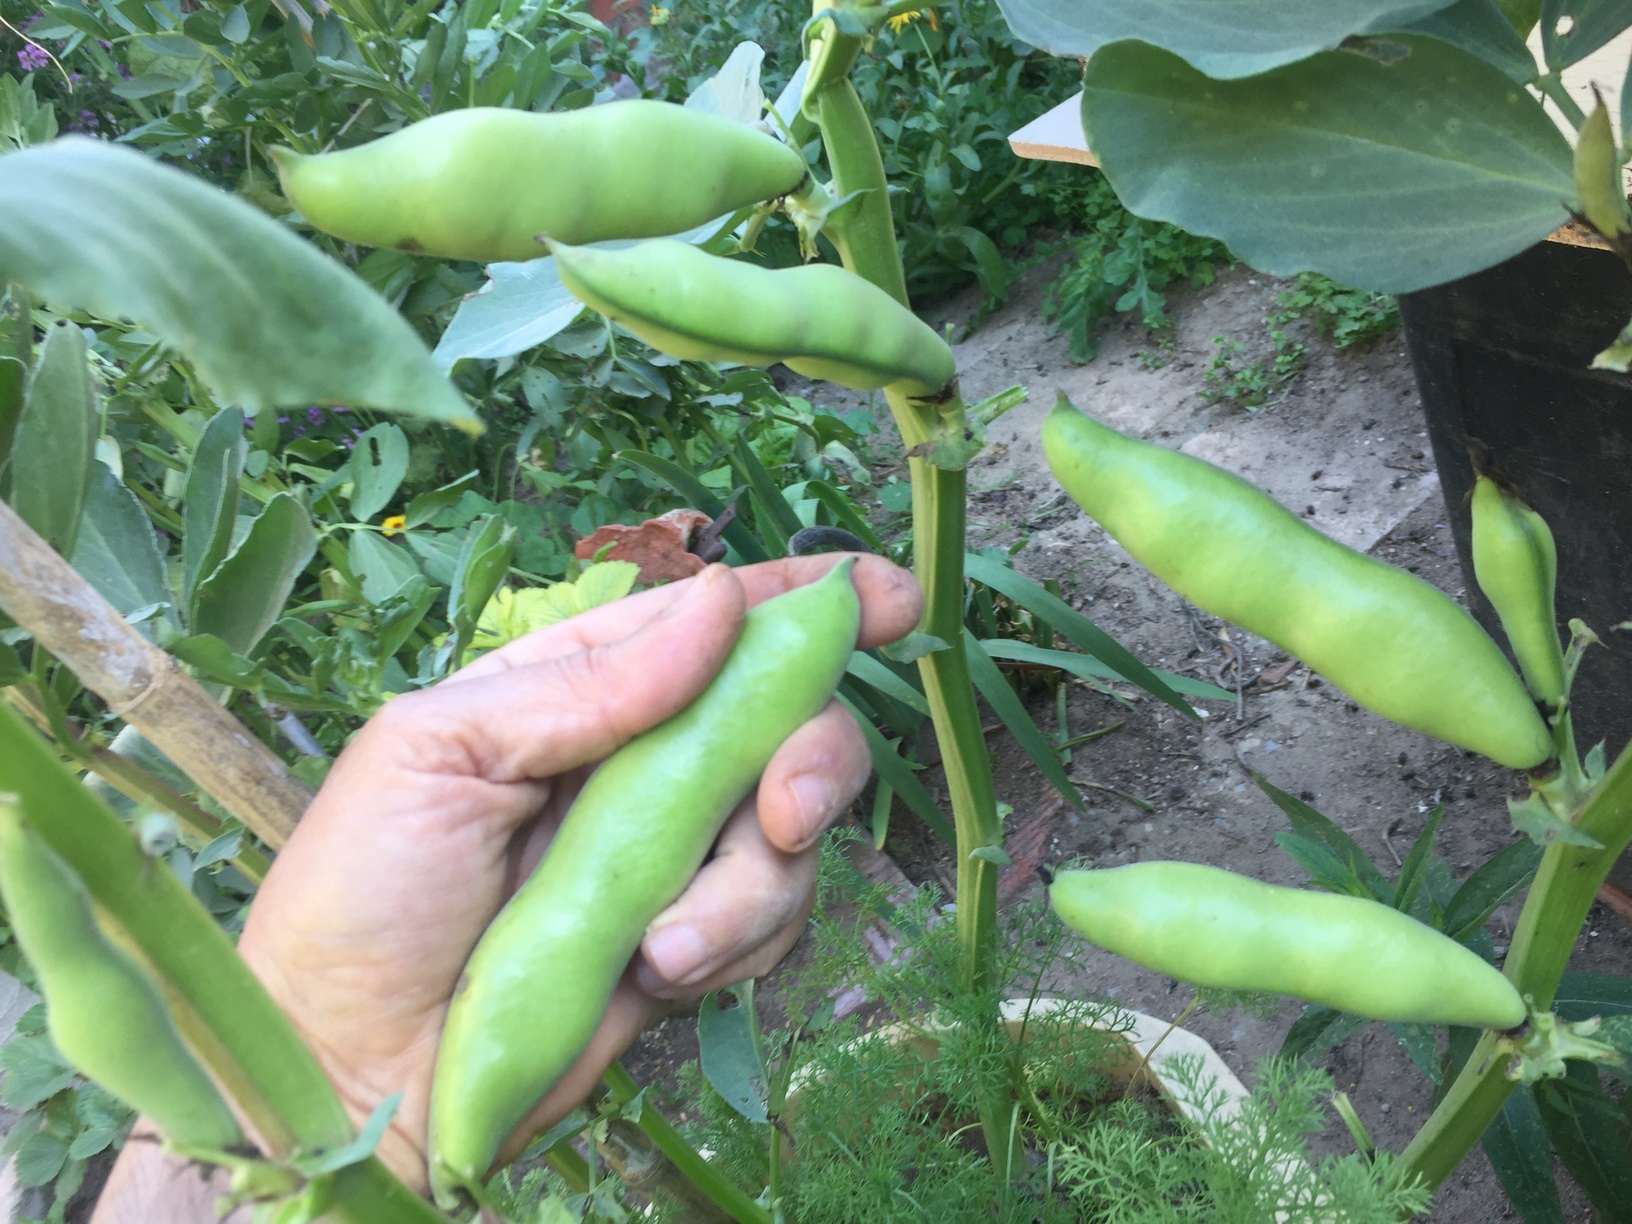 Broad Beans are a superb crop for smaller plots, producing high yields from a comparatively small area of your vegetable garden. They are best eaten freshly picked from the plant.